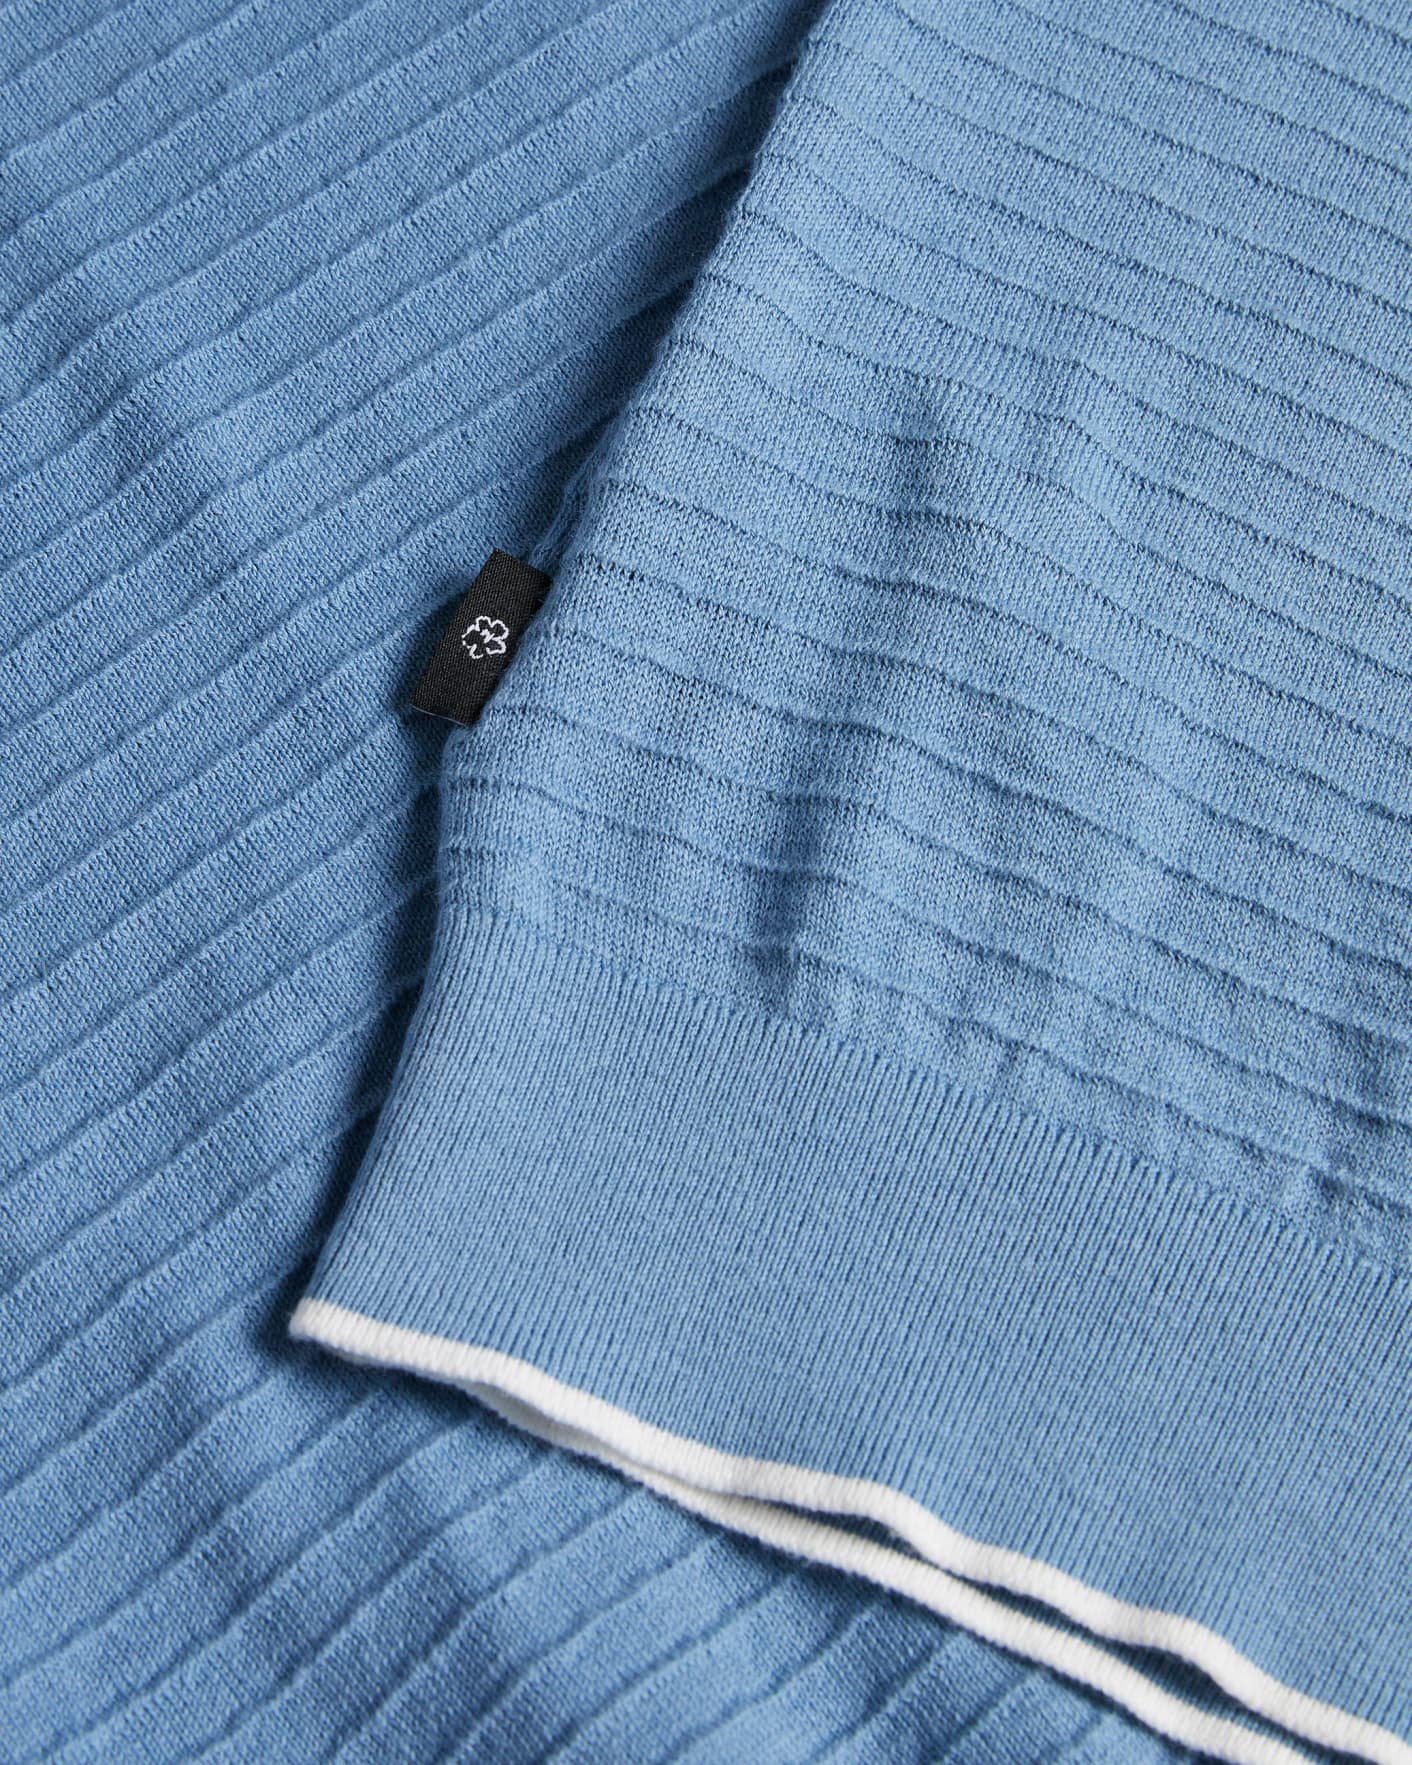 Sky Blue Textured Stripe Knitted Polo Shirt Ted Baker